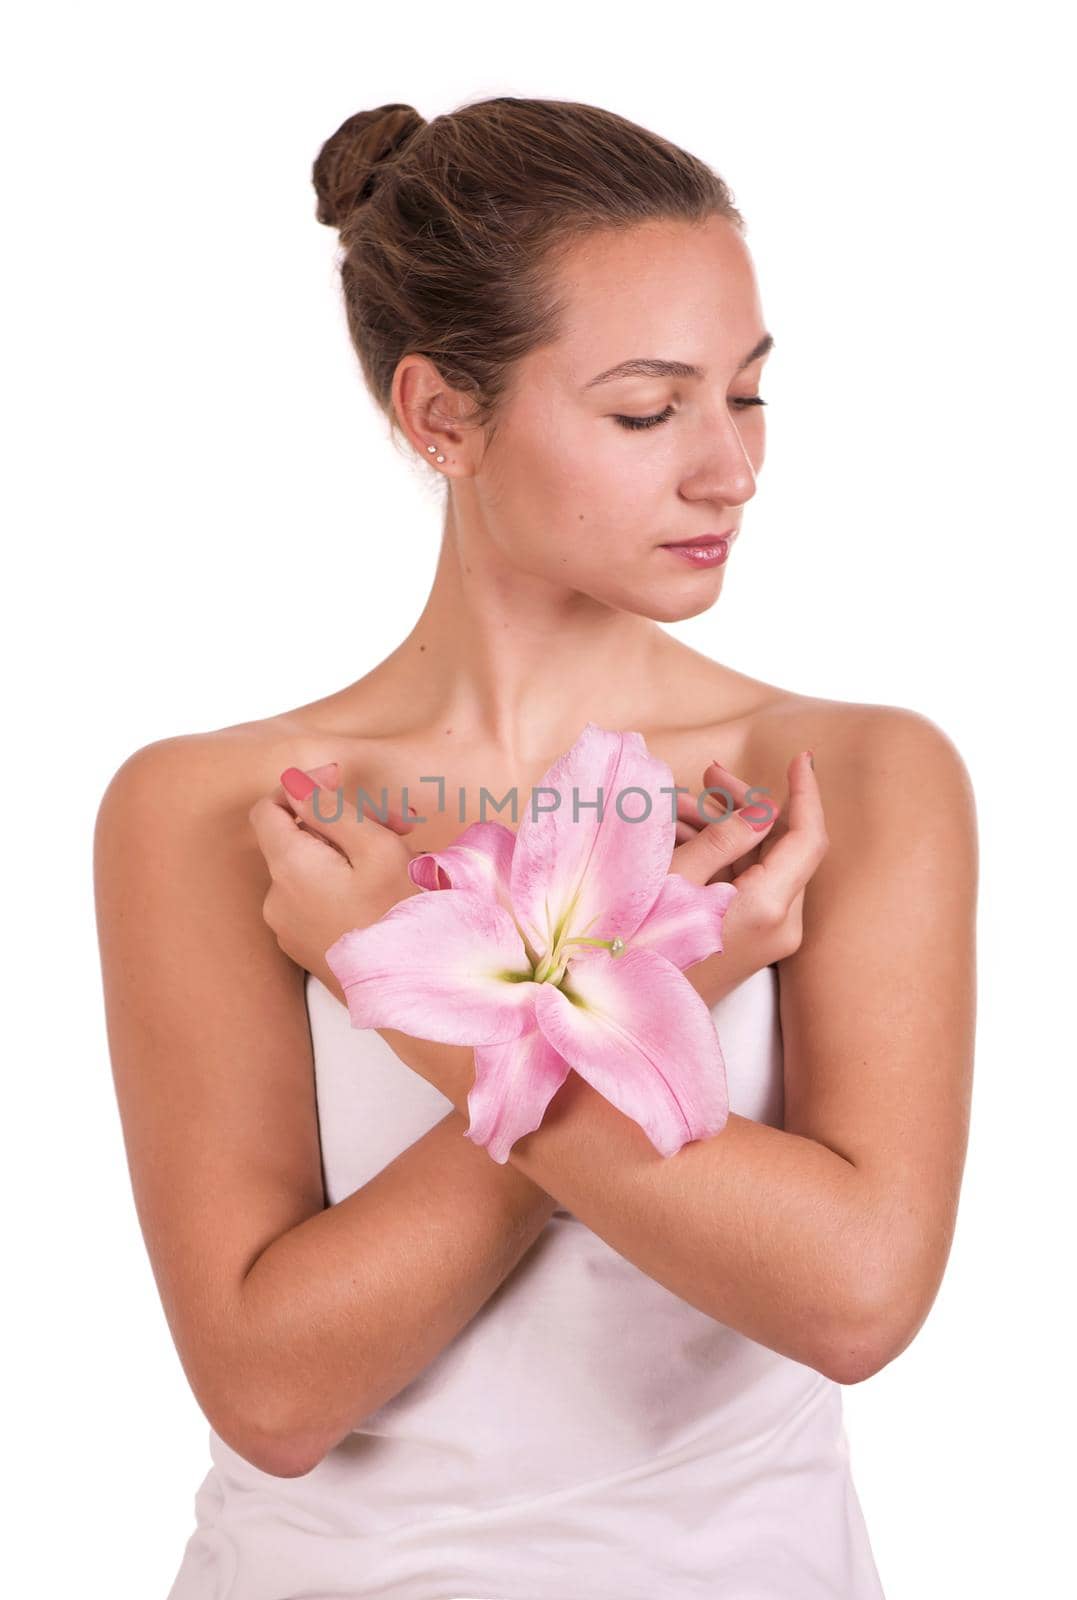 Beauty face of the young beautiful woman with flower. Female touching skin. by aprilphoto